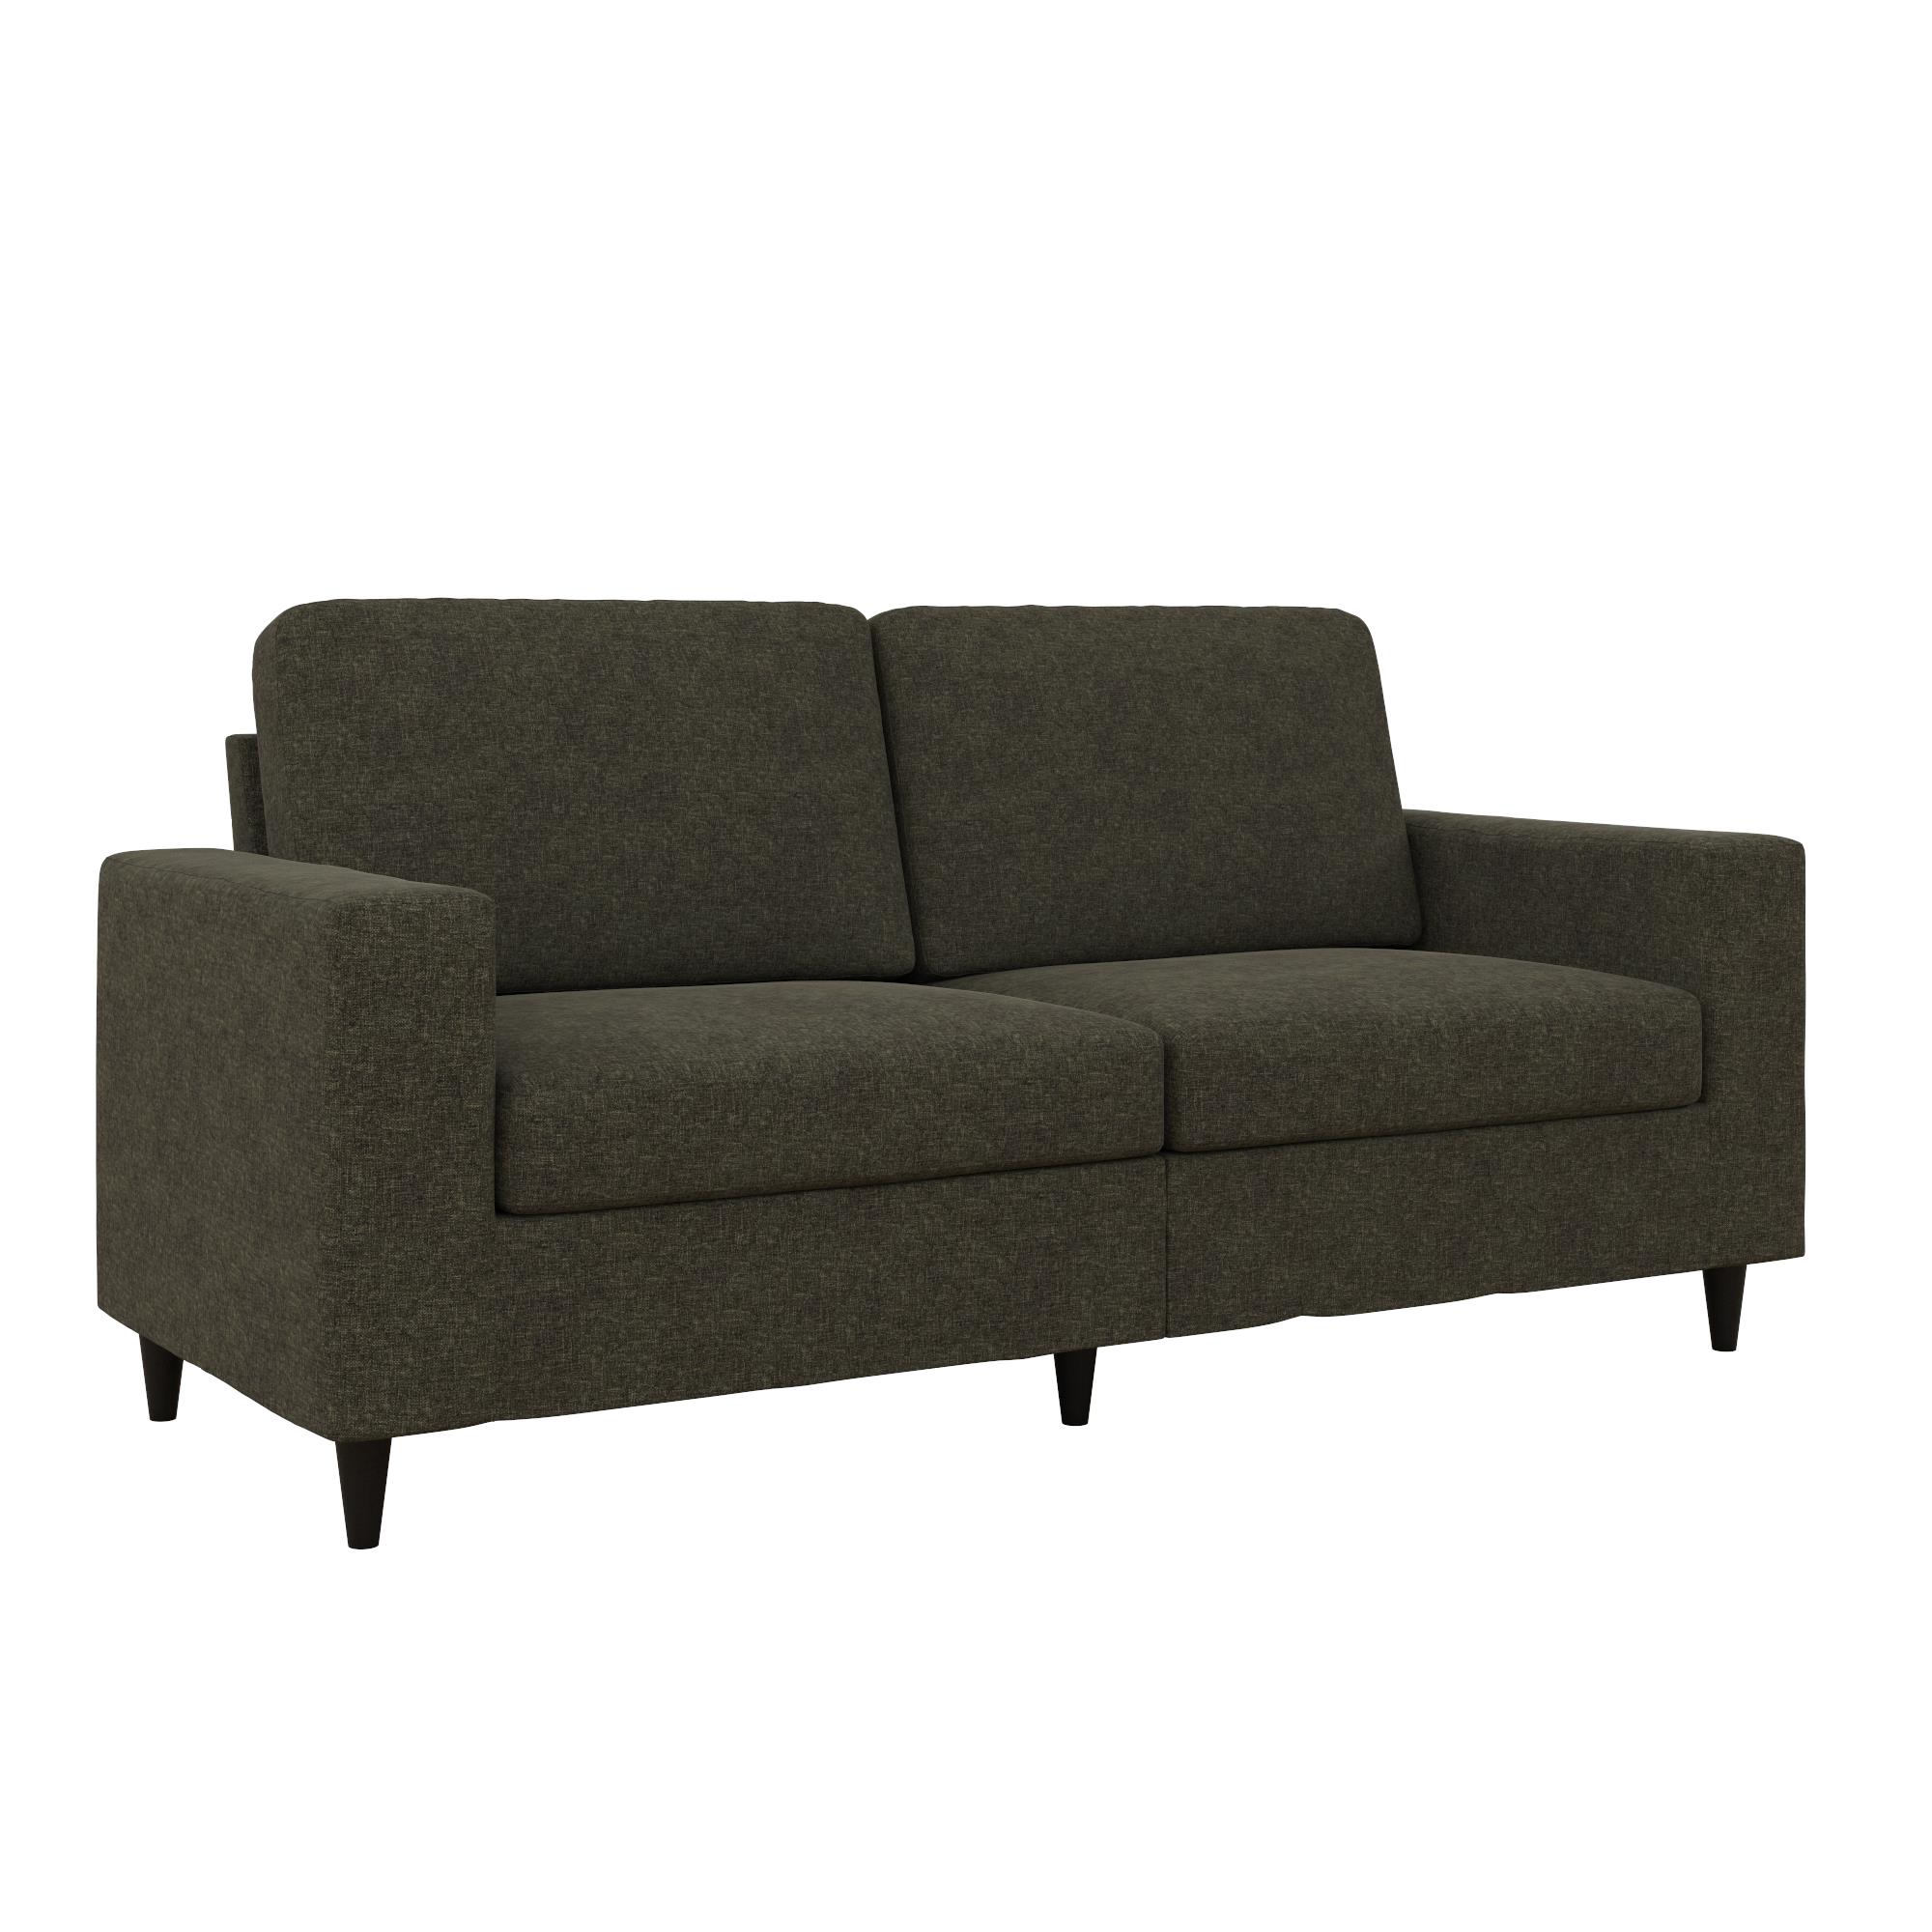 DHP Cooper 3 Seater Sofa, Gray Linen - image 5 of 18